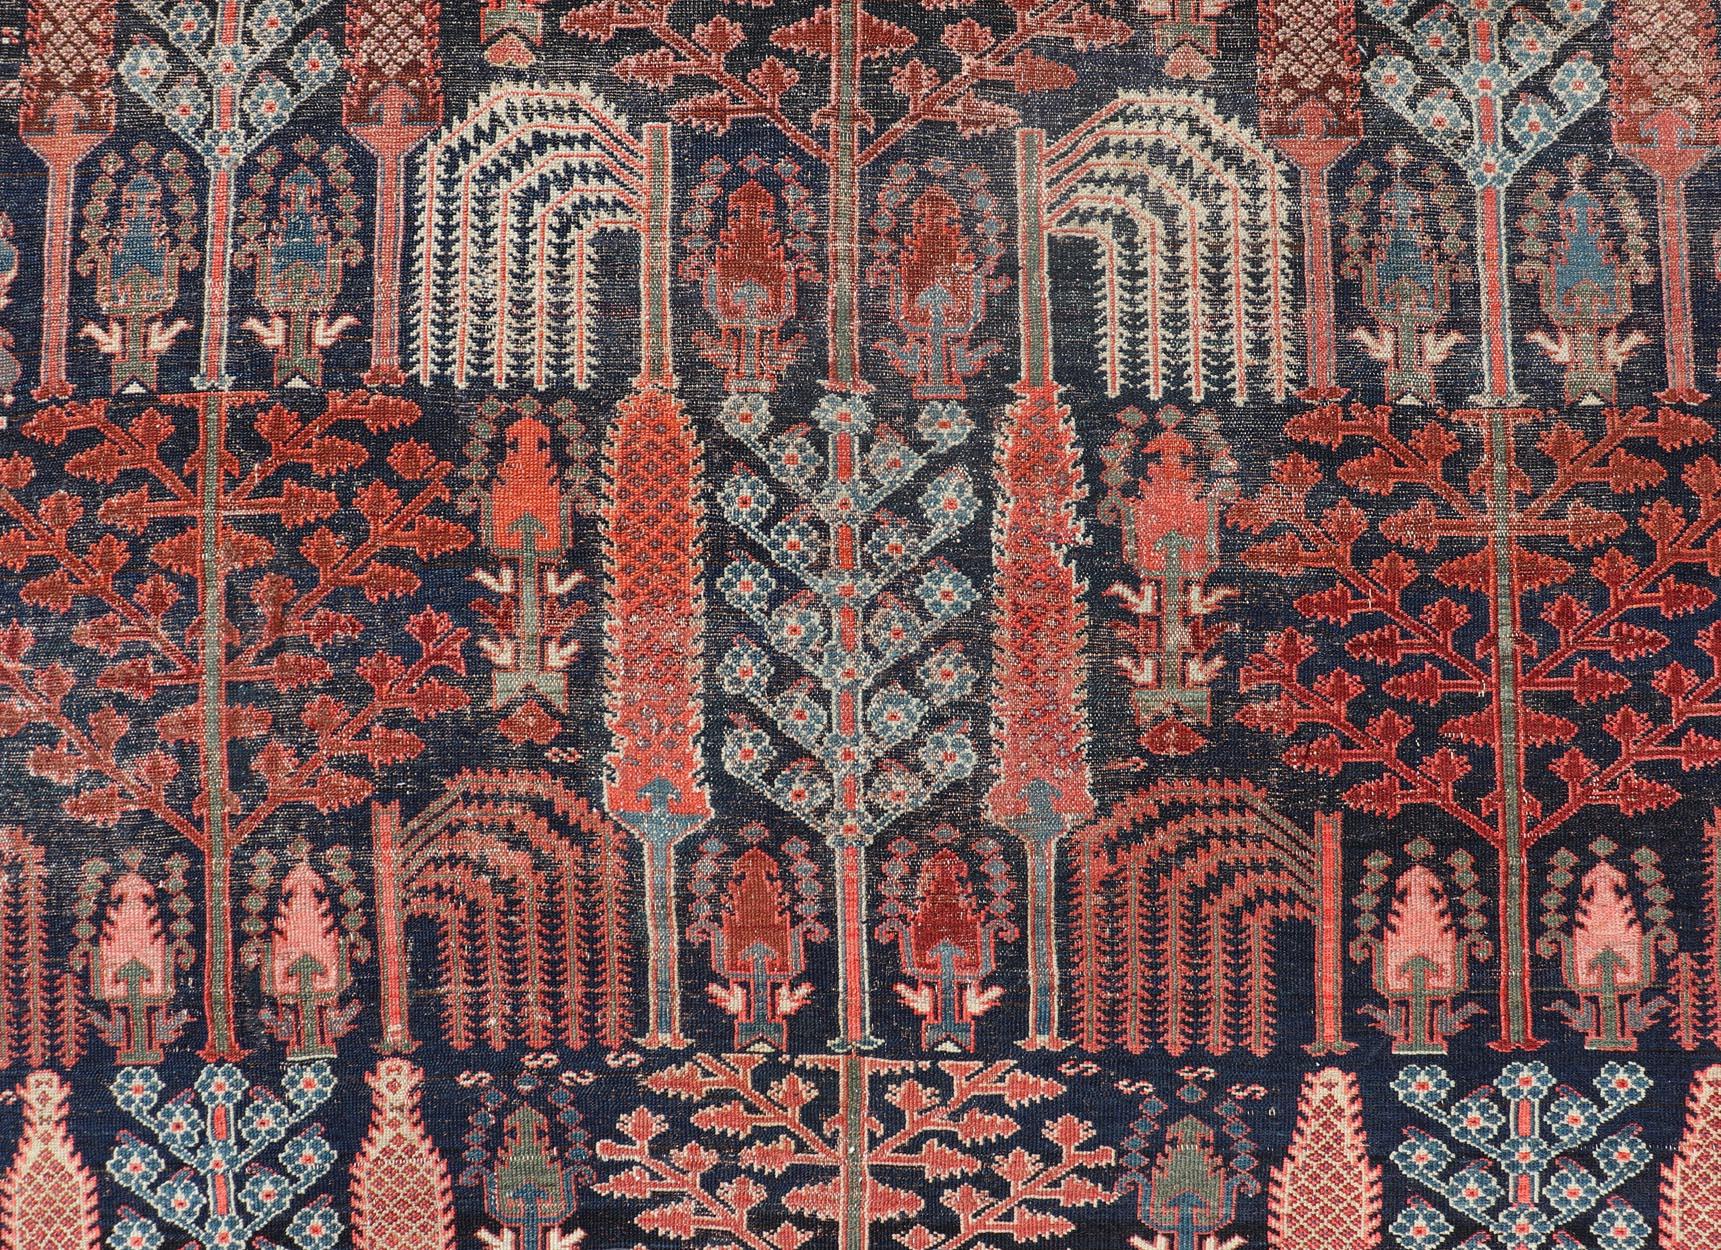 Antique Persian Bakhshaish Rug with All-Over Tree and Willow Design In Good Condition For Sale In Atlanta, GA